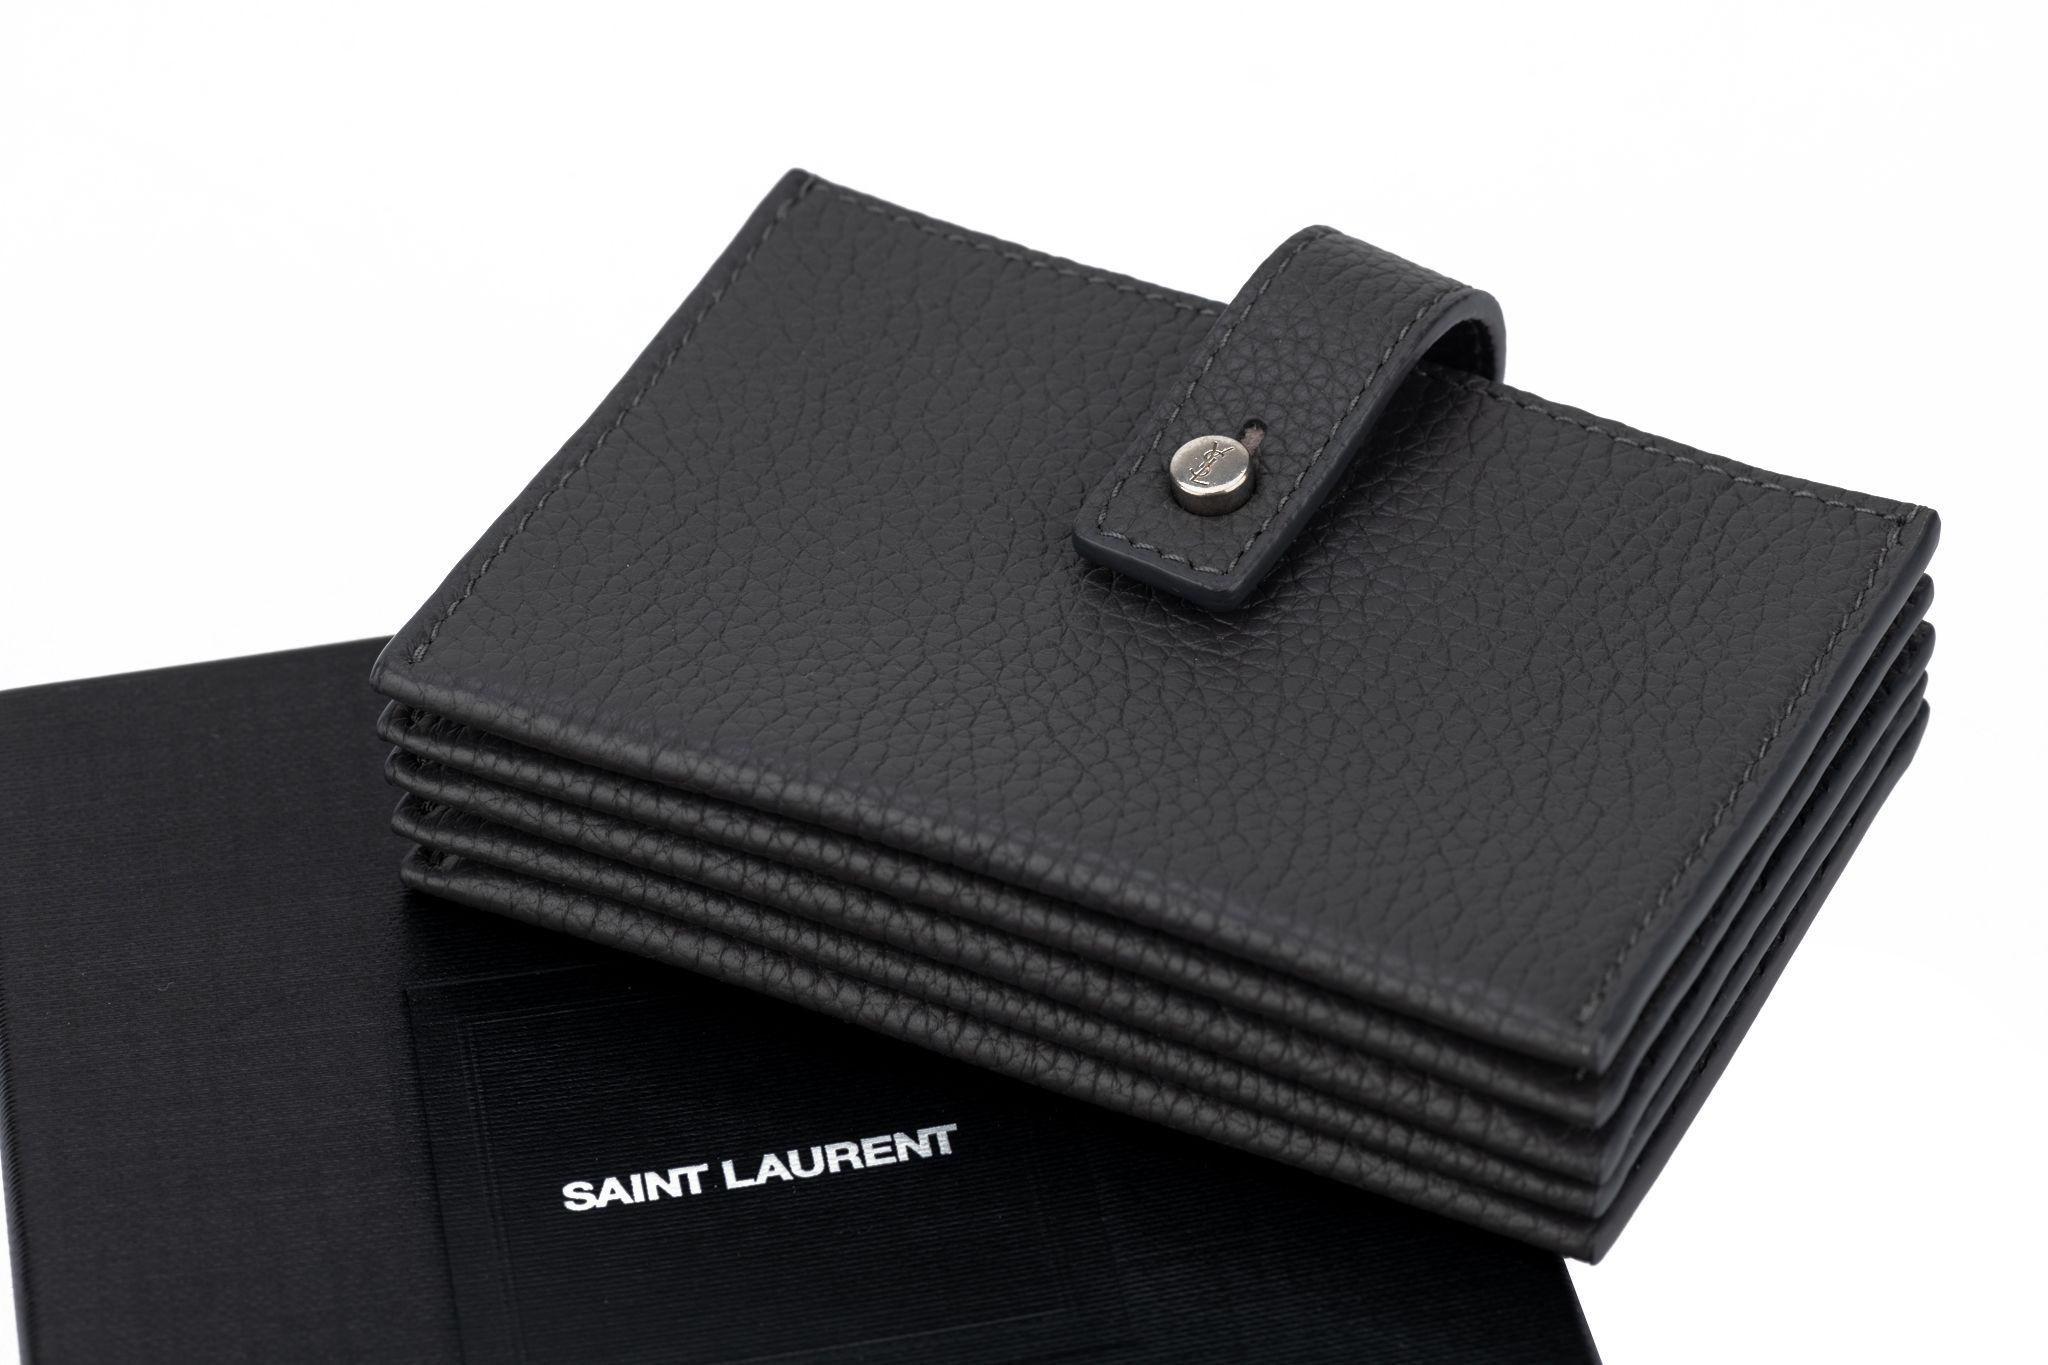 YSL brand new unisex credit card wallet, asphalt grey pebbled leather with logo silver details.
Comes with original dustcover and box.